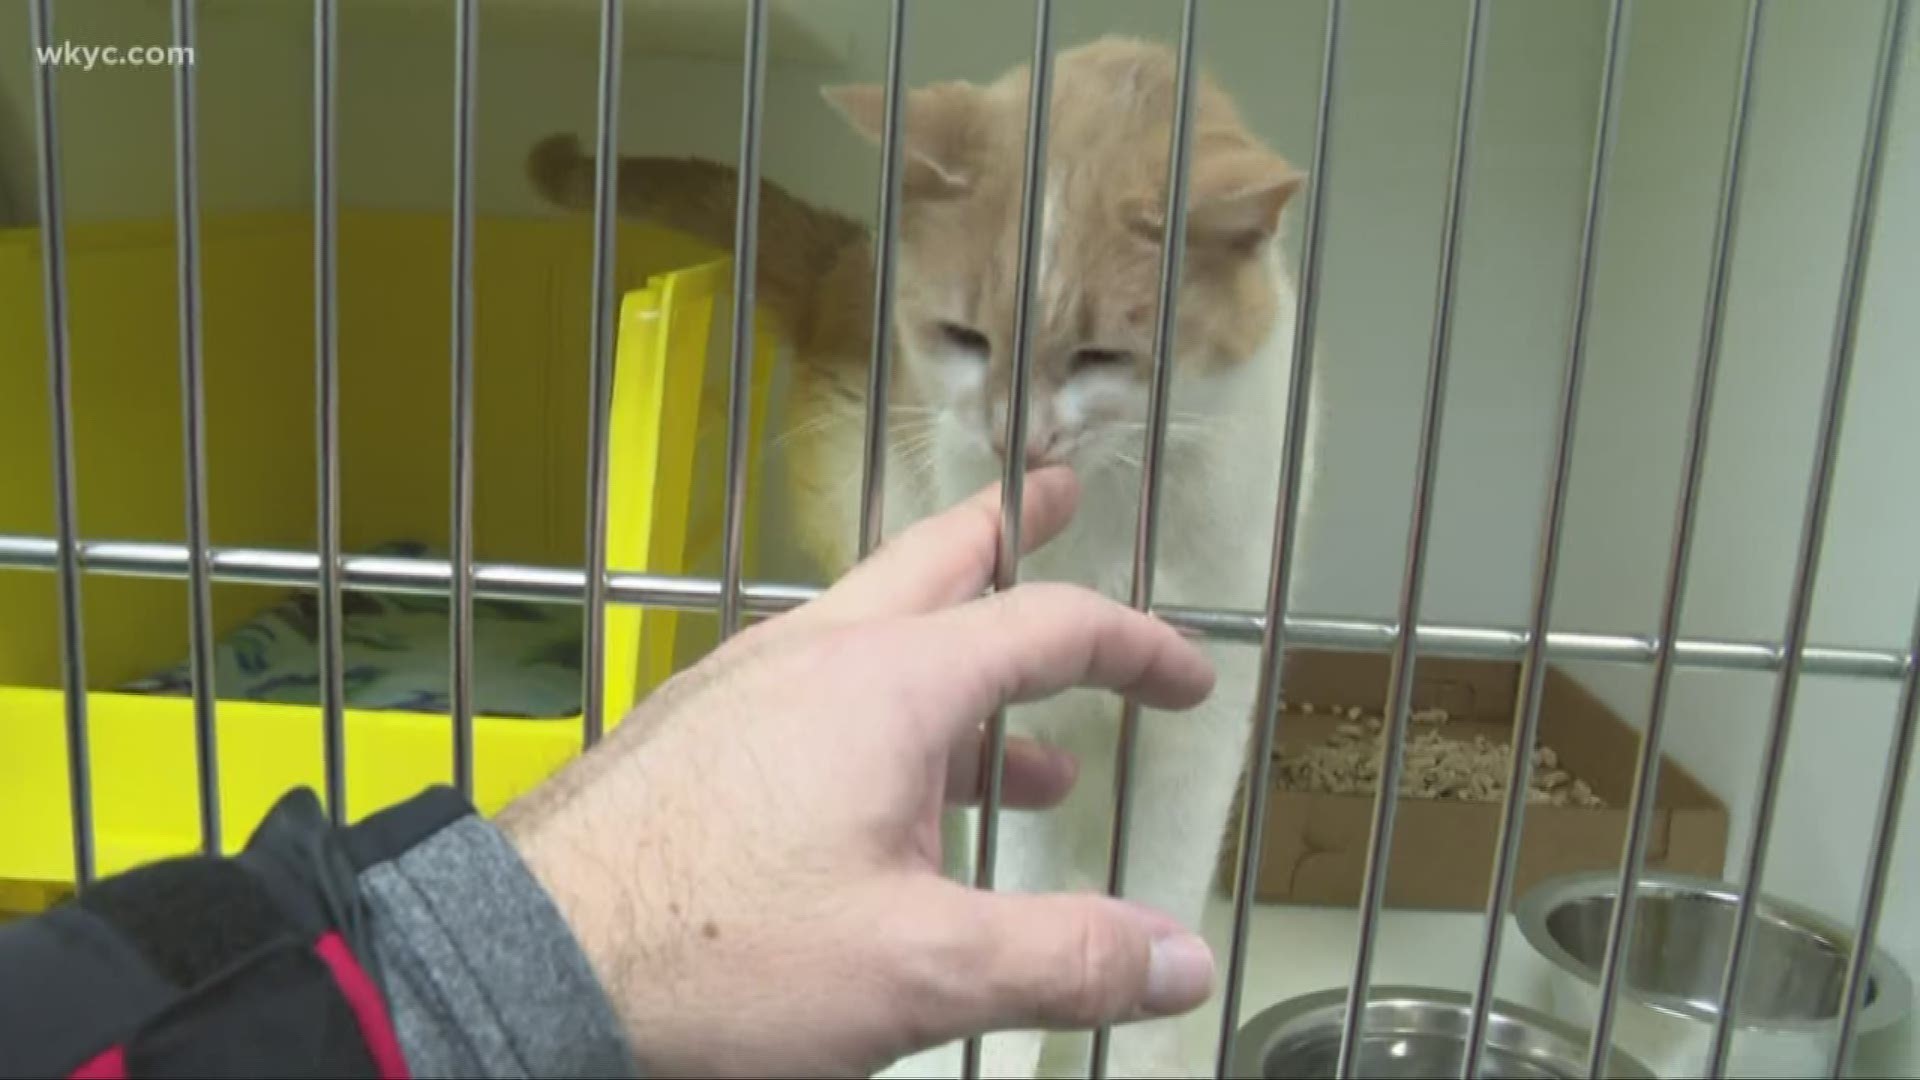 More than 100 cats were rescued from a home this week. This could be the weekend to make a feline your furrever friend!